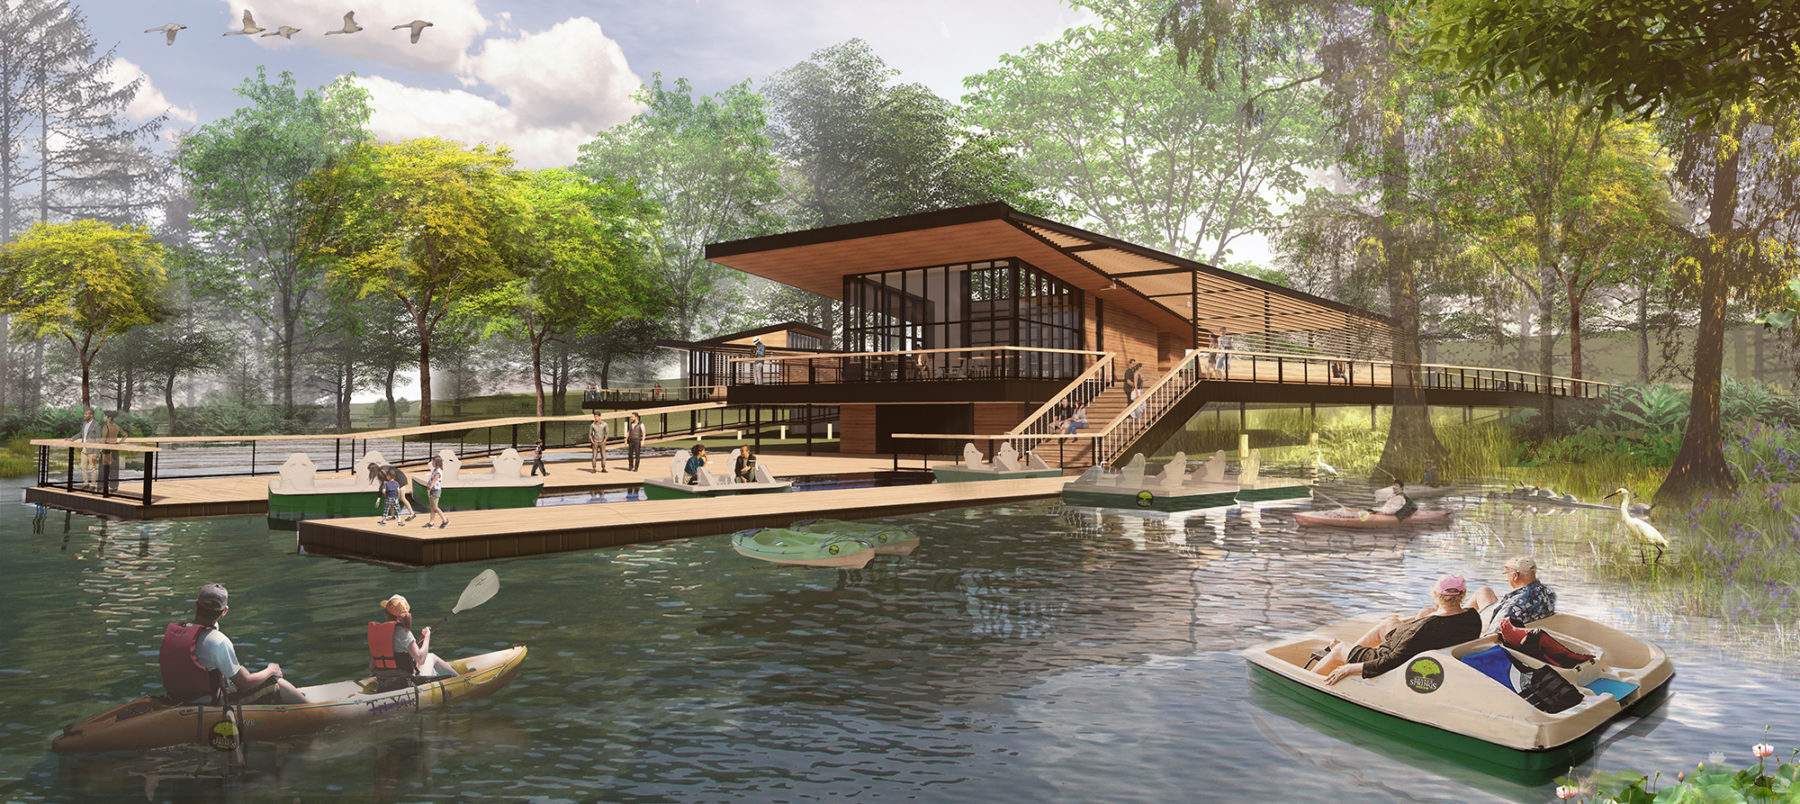 Rendering of bonnet springs park with people canoeing and paddle boating around the Nature Center